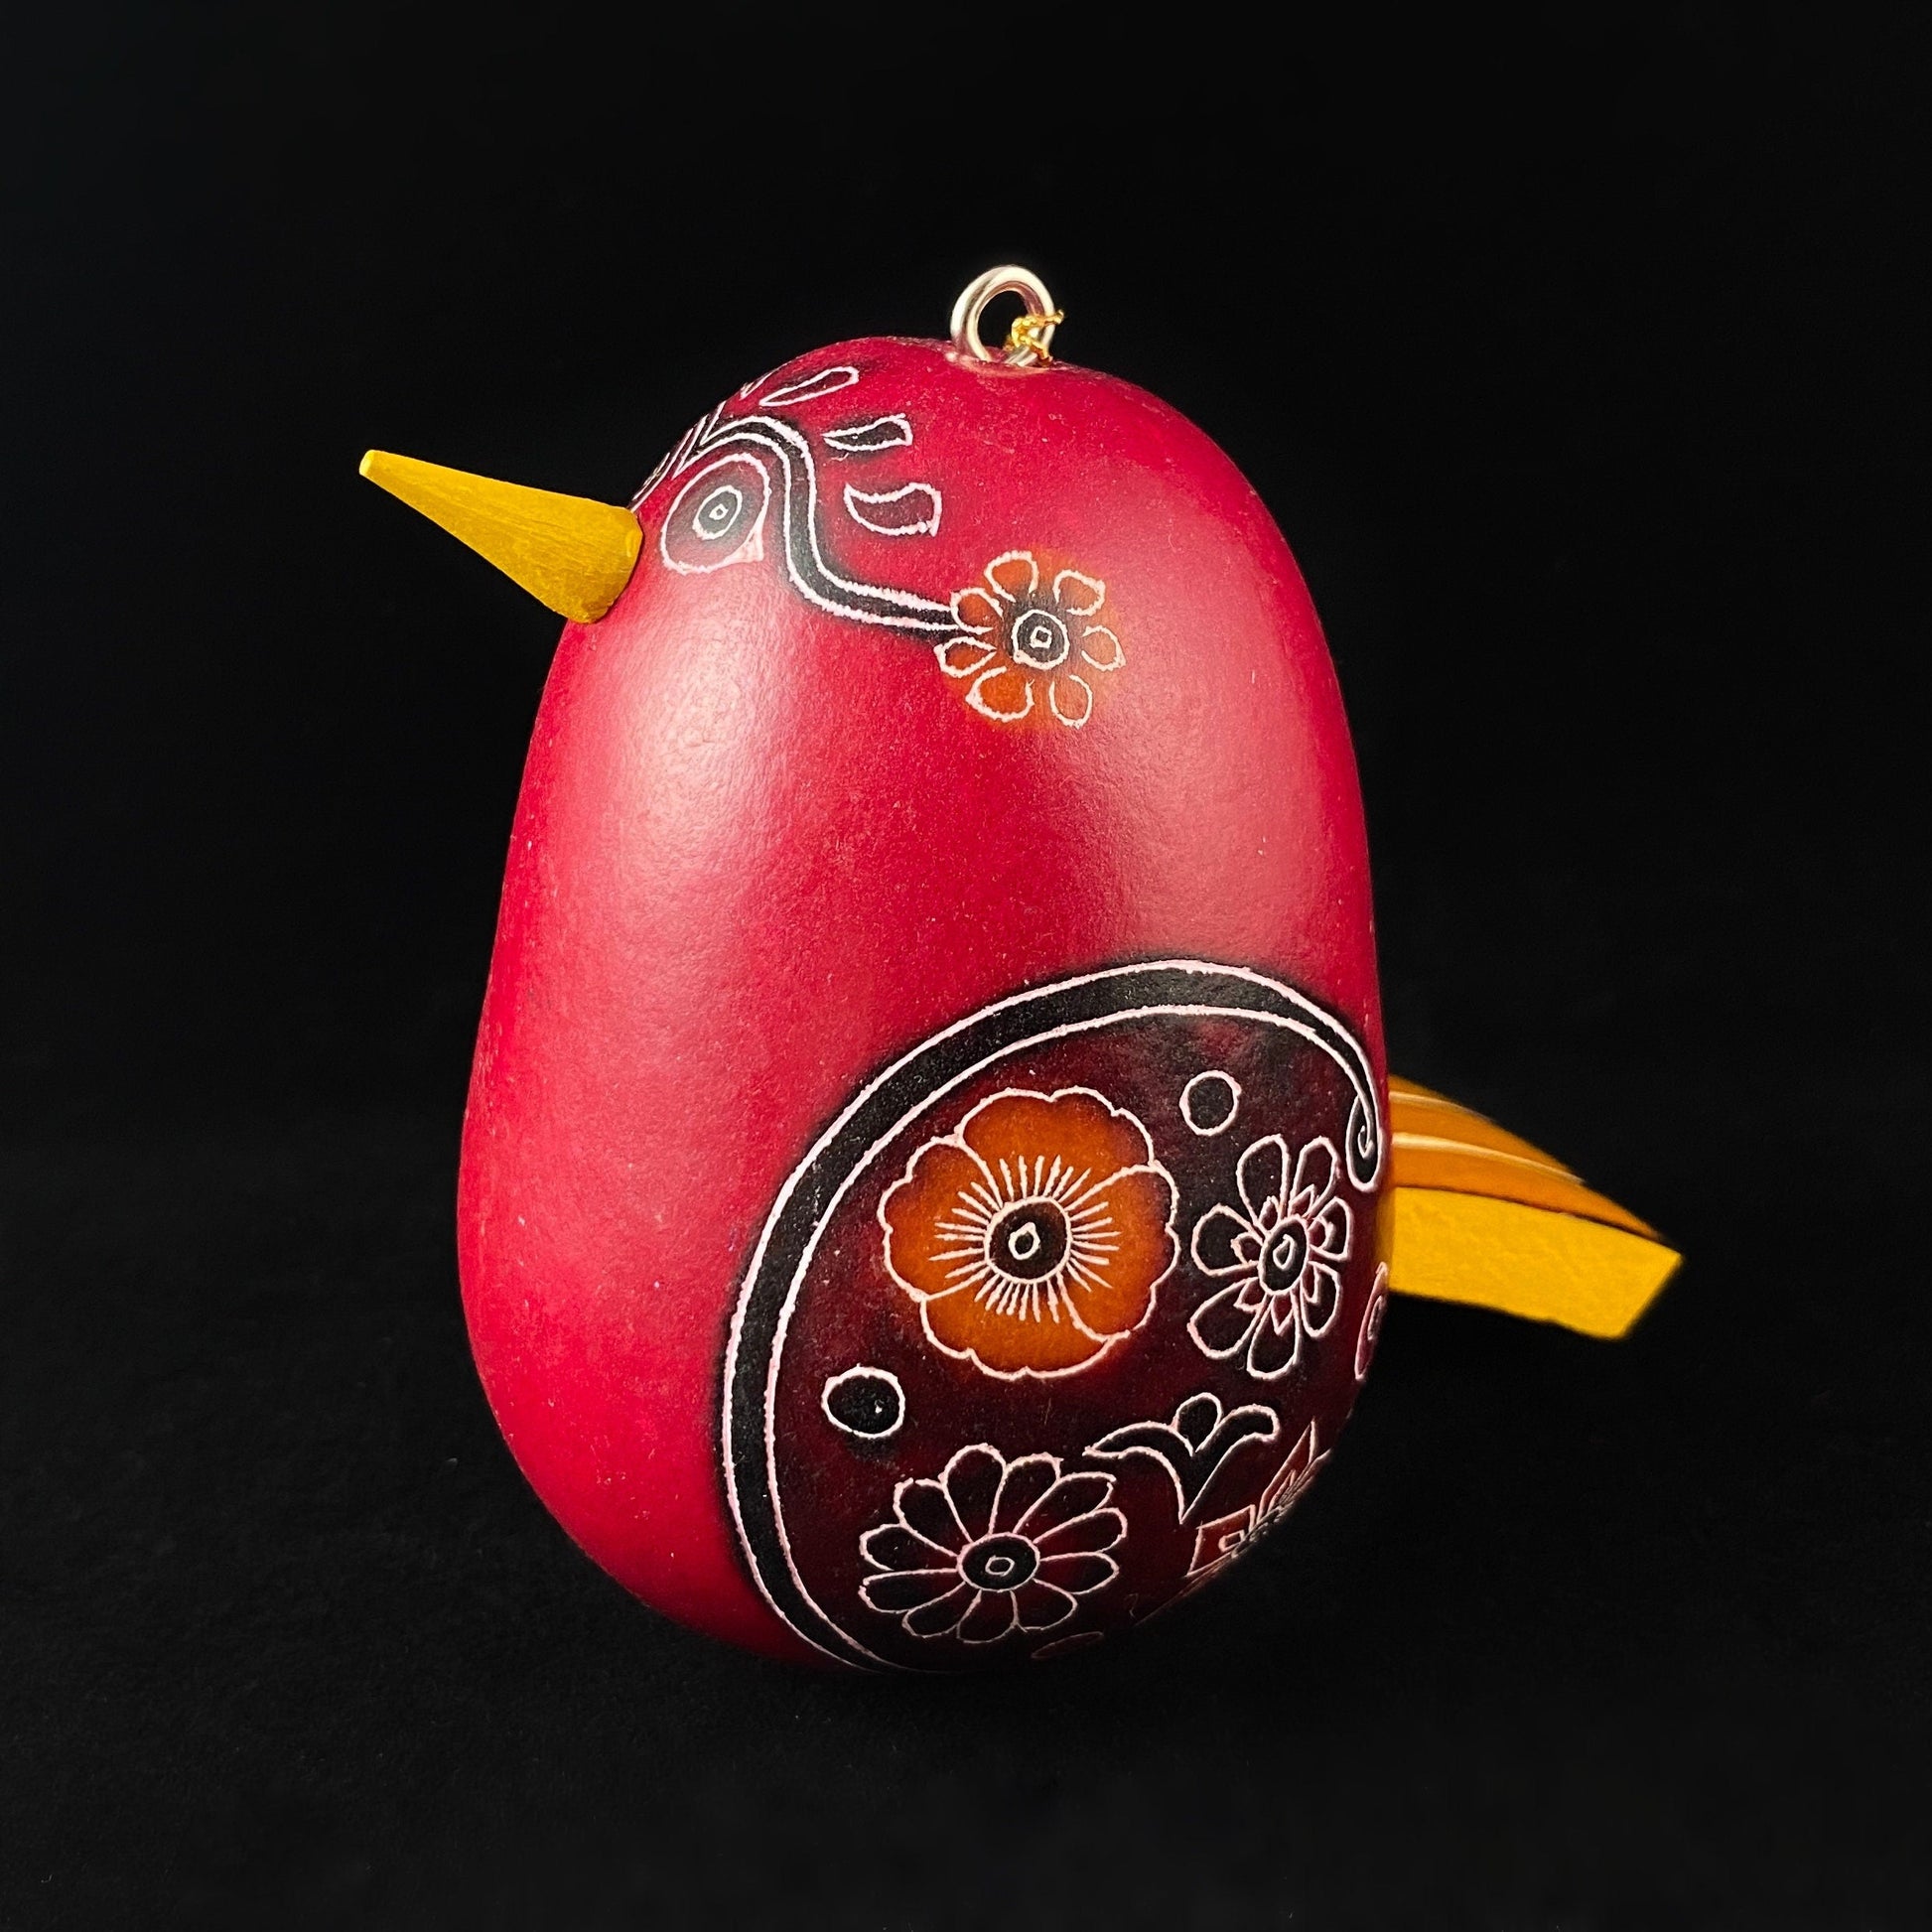 Decorative Red Bird Ornament/Maraca - Hand-Carved and Hand Painted Peruvian Gourd